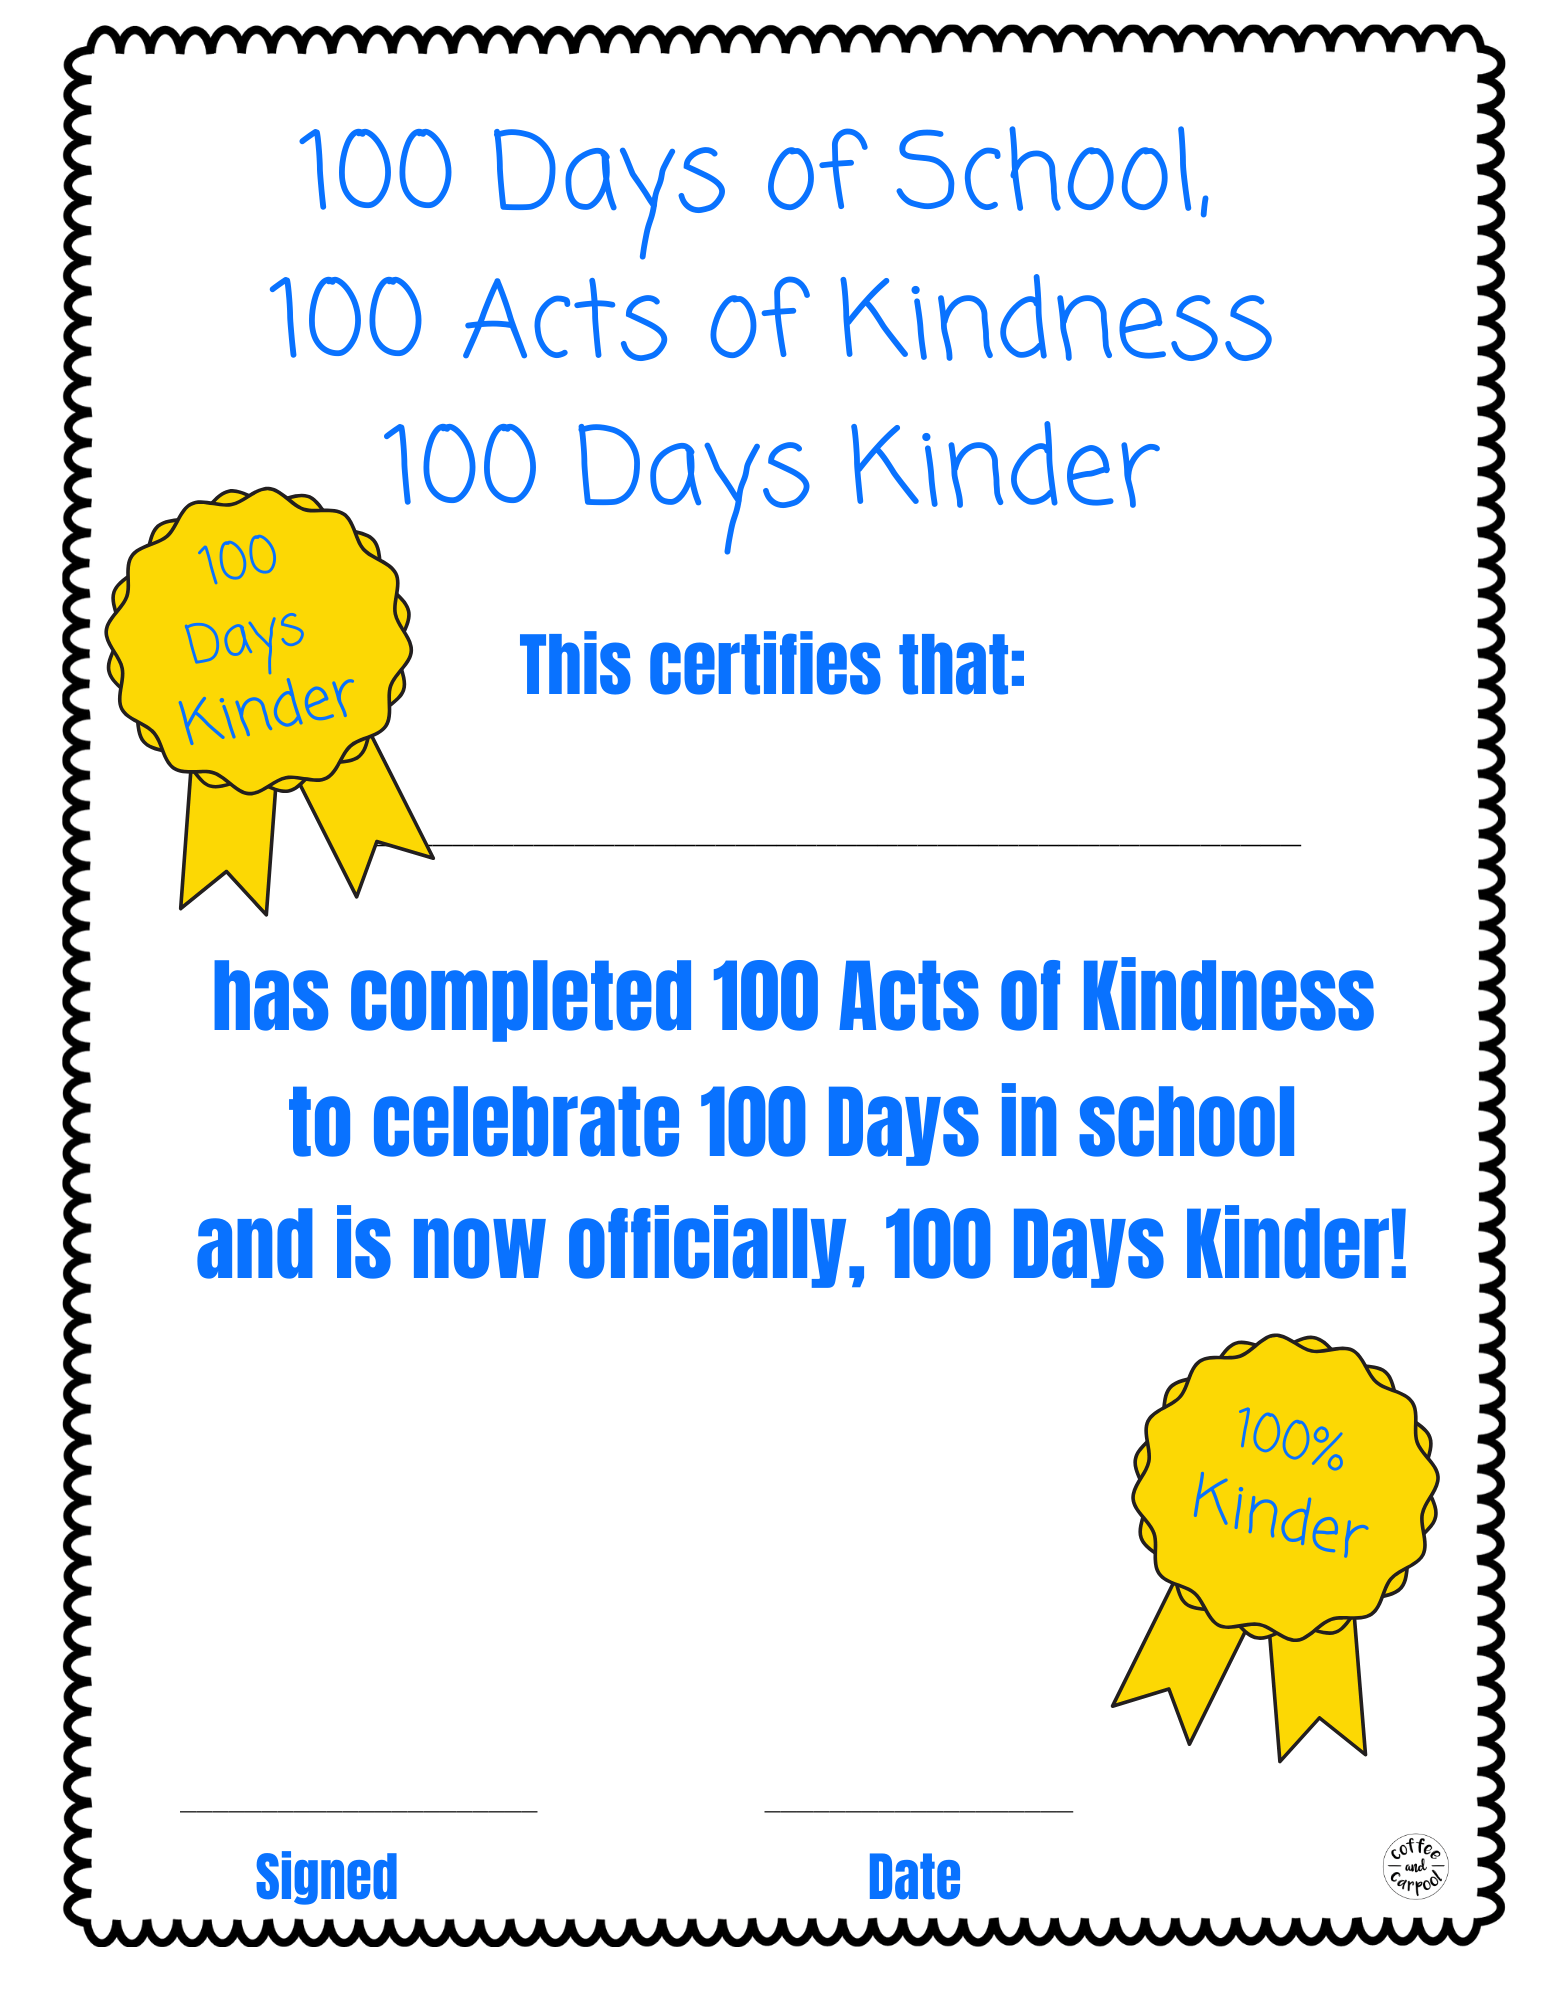 Get more kindness into your classroom and your sel curriculum with this 100 Days of Kindness Activities to make kindness more of a habit #kindnessactivitiesforkids #kindnessactivities #sel #selcurriculum #100daysofschool #100thdayofschool